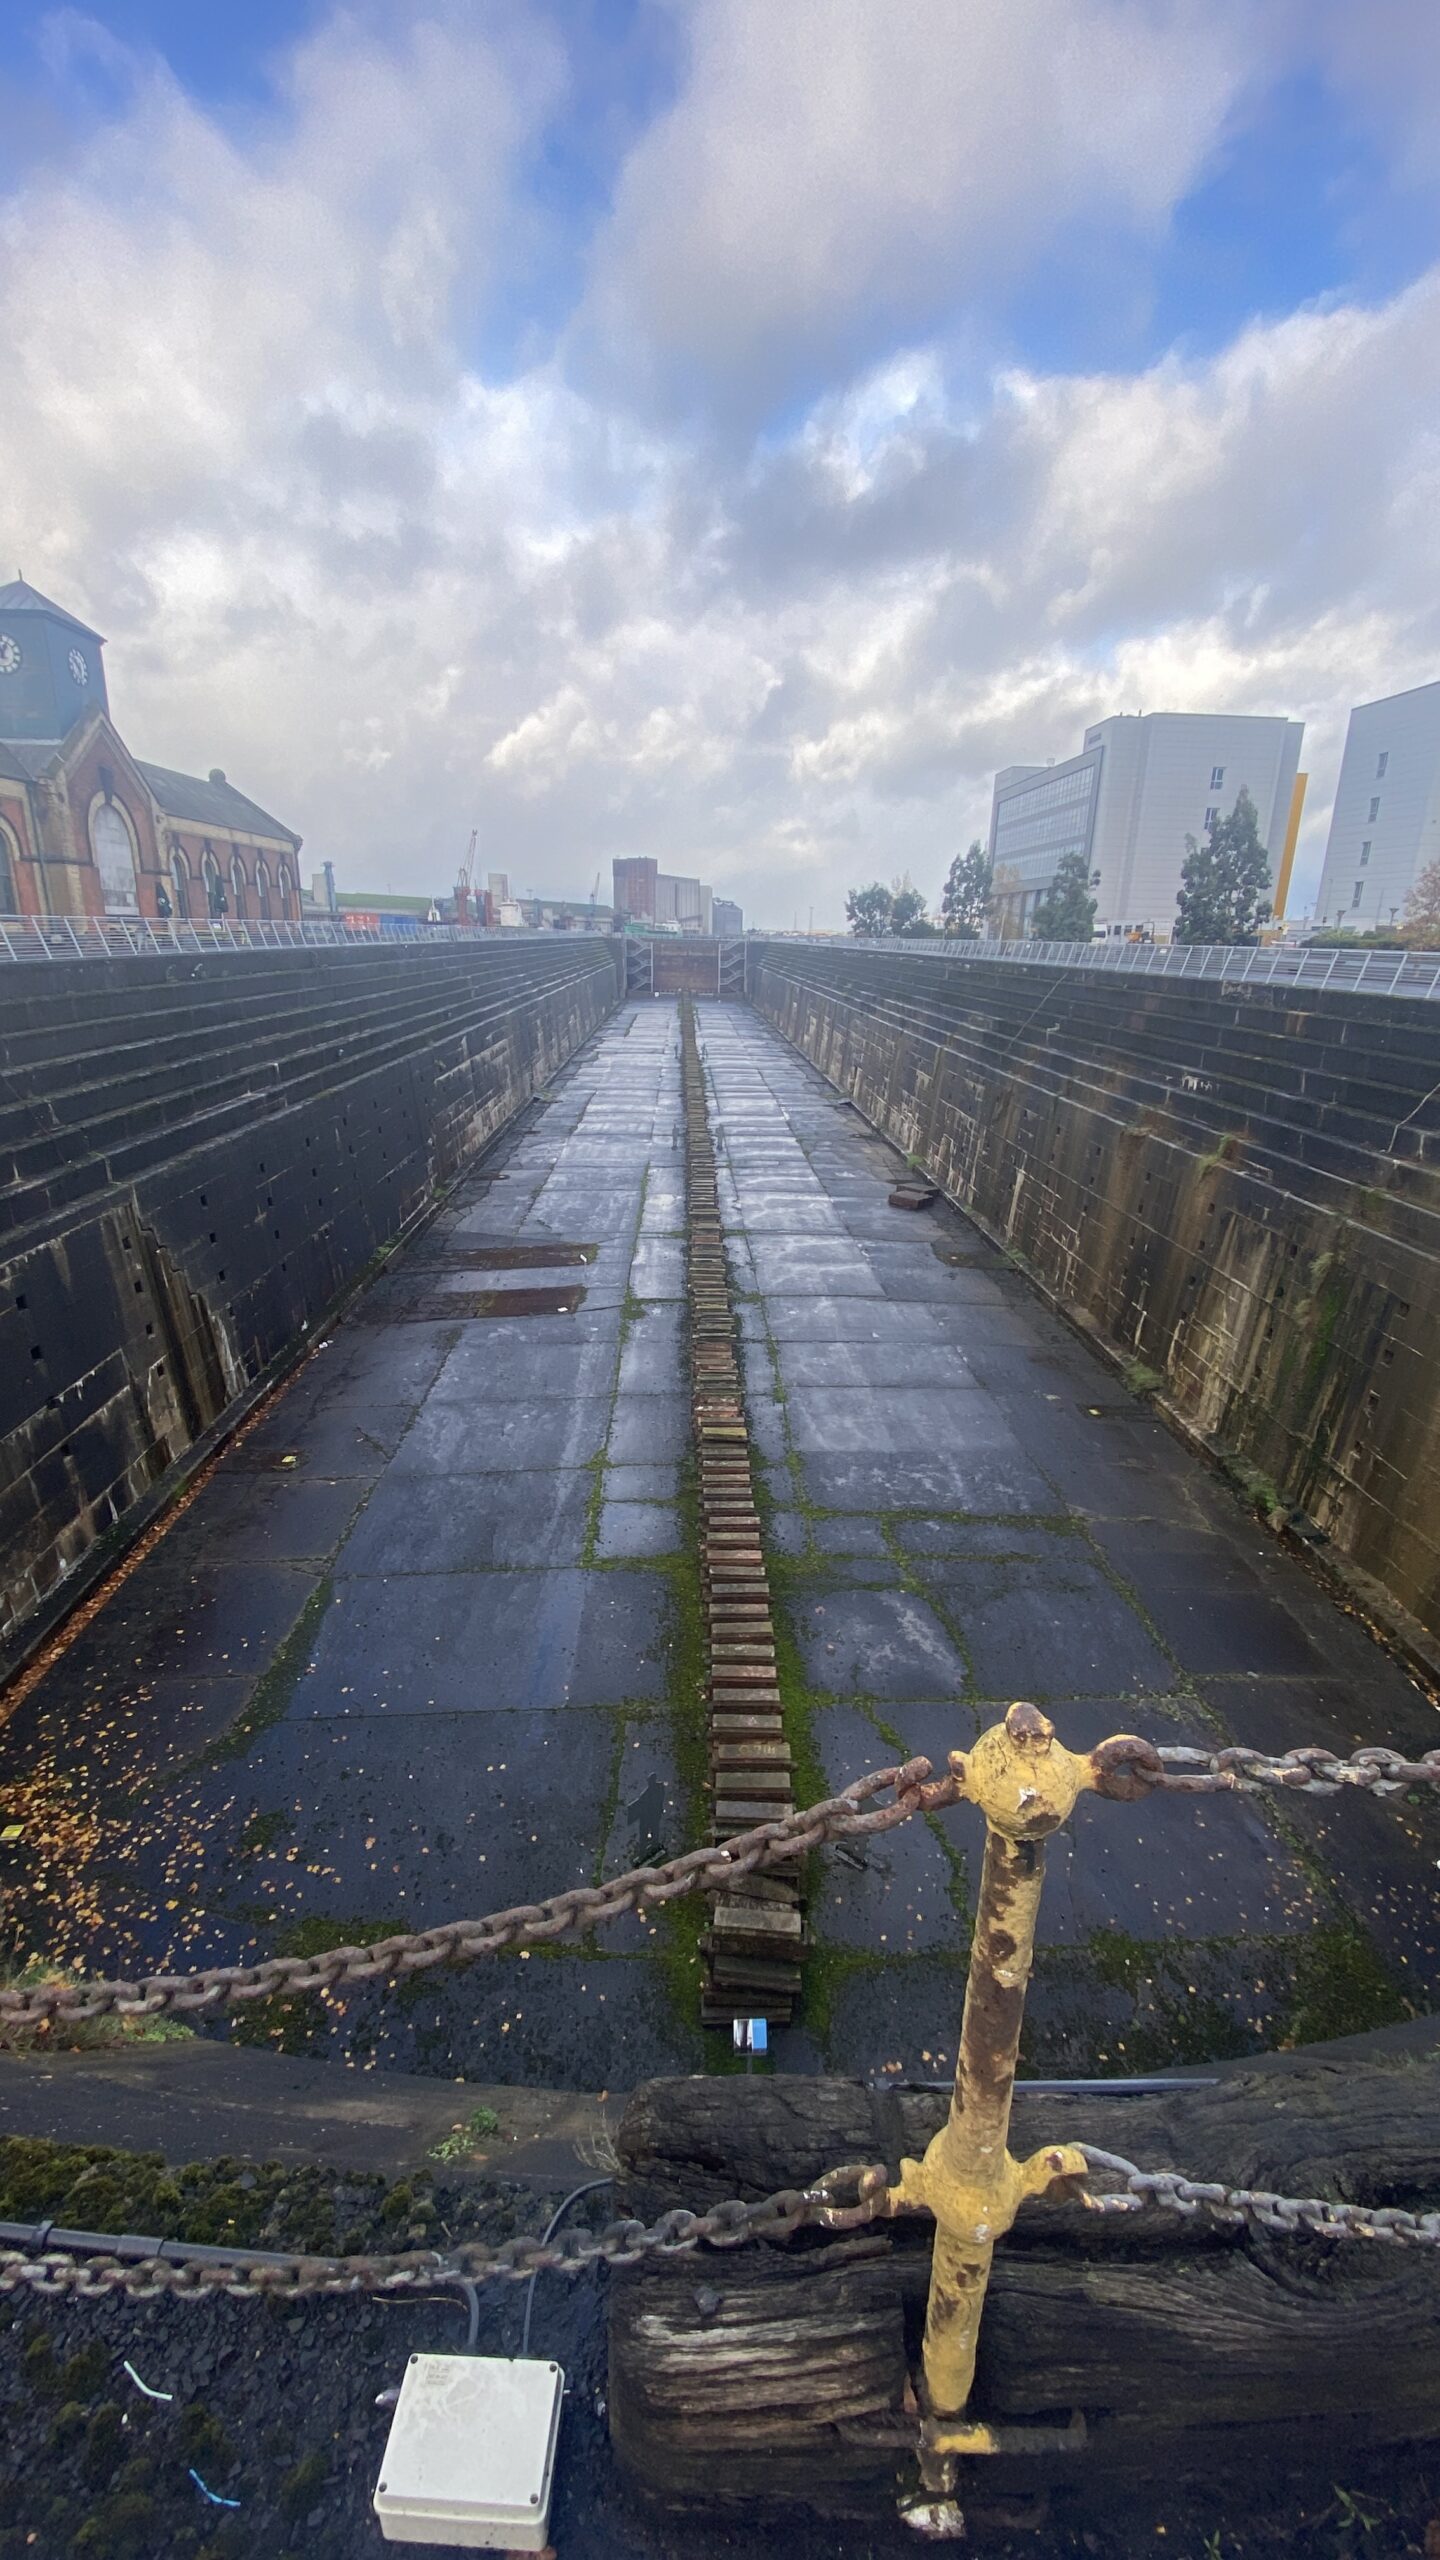 A Titanic Tour: From the Keel Plates up - Titanic Connections